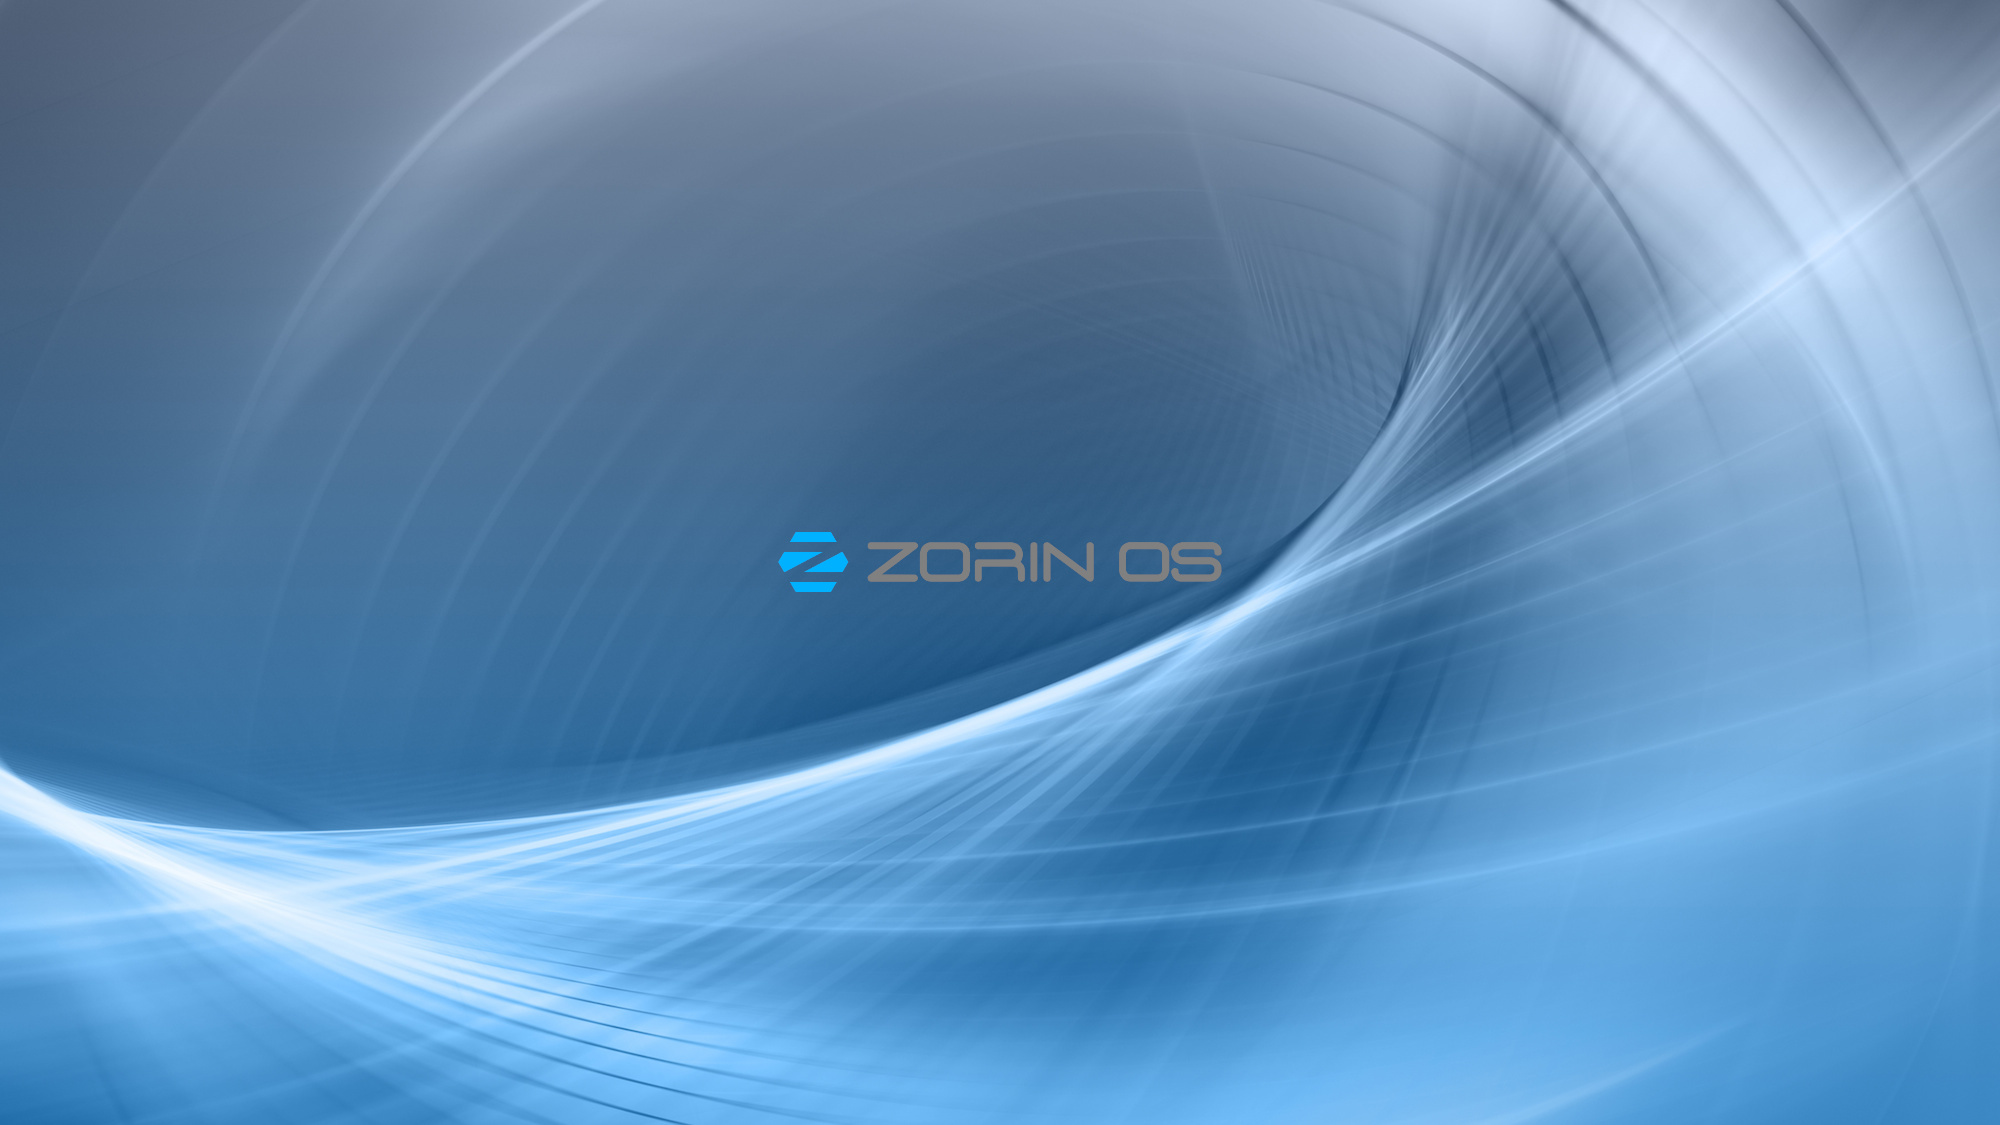 General 2000x1125 Linux computer Zorin OS operating system